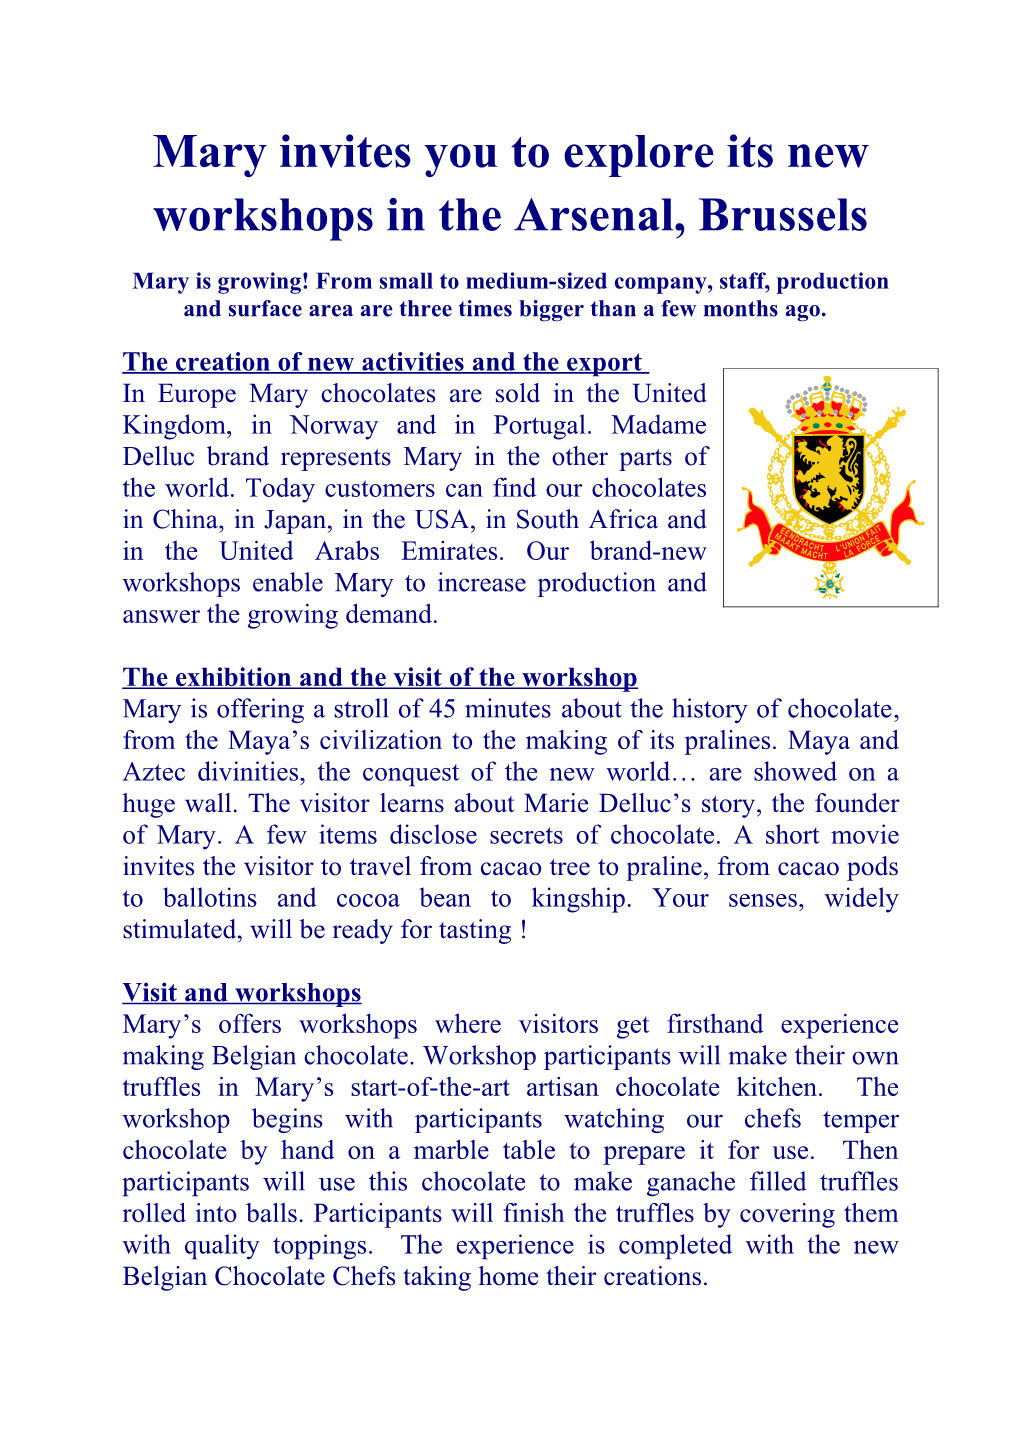 Mary Invites You to Explore Its New Workshops in the Arsenal, Brussels